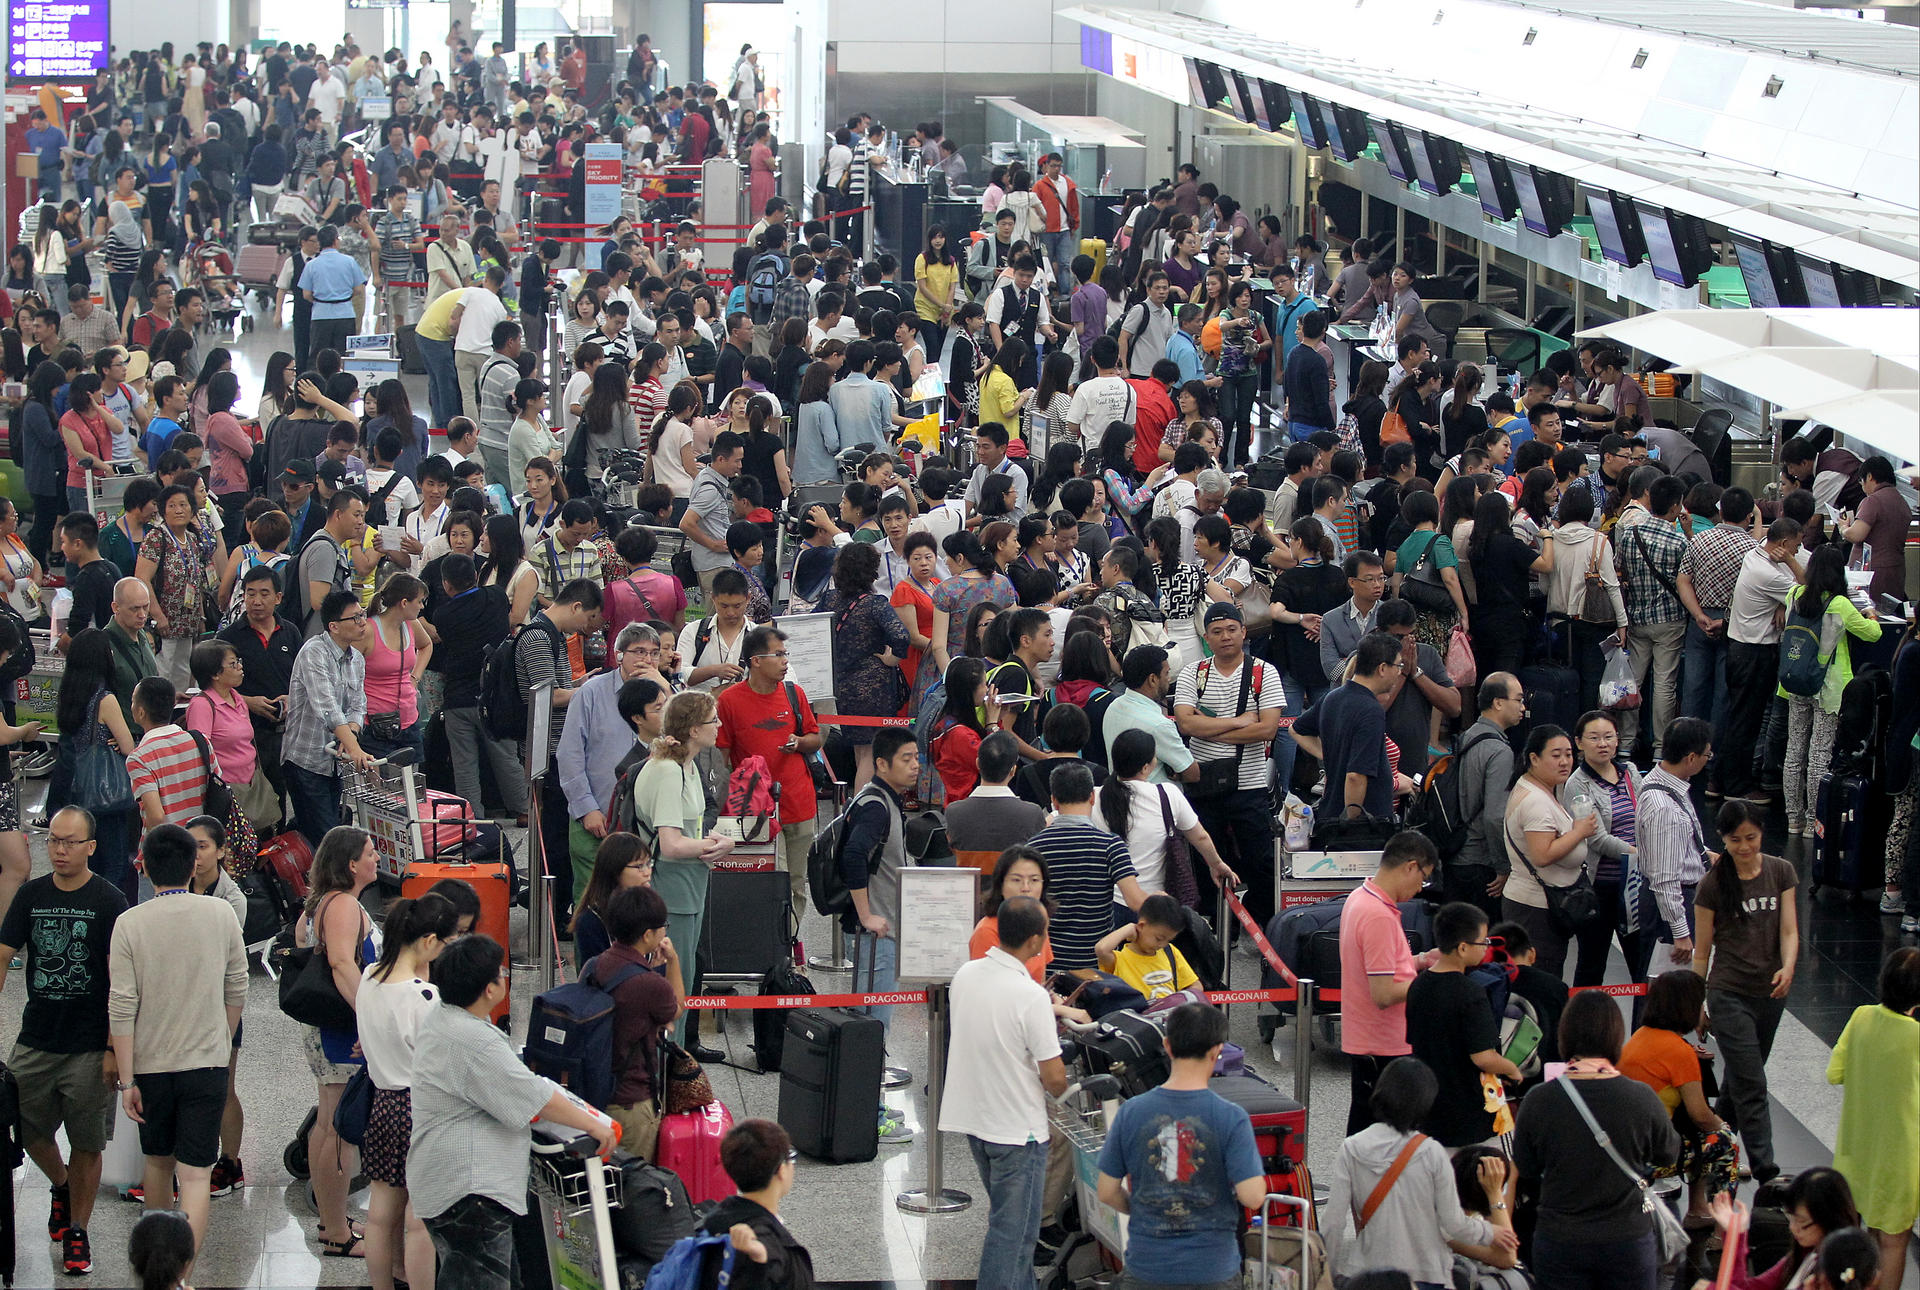 Passengers at the airport in Hong Kong, where Cathay Pacific relies heavily on premium travellers for revenue. Photo: K.Y. Cheng